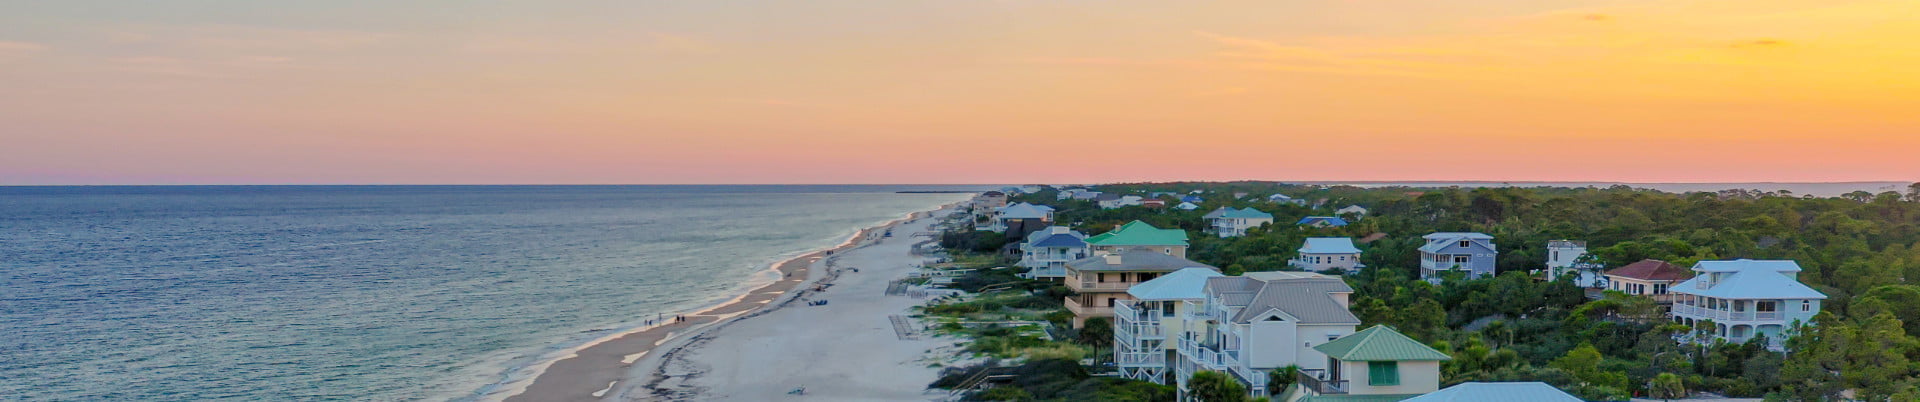 St. George Island FL Beach Front Homes for Sale